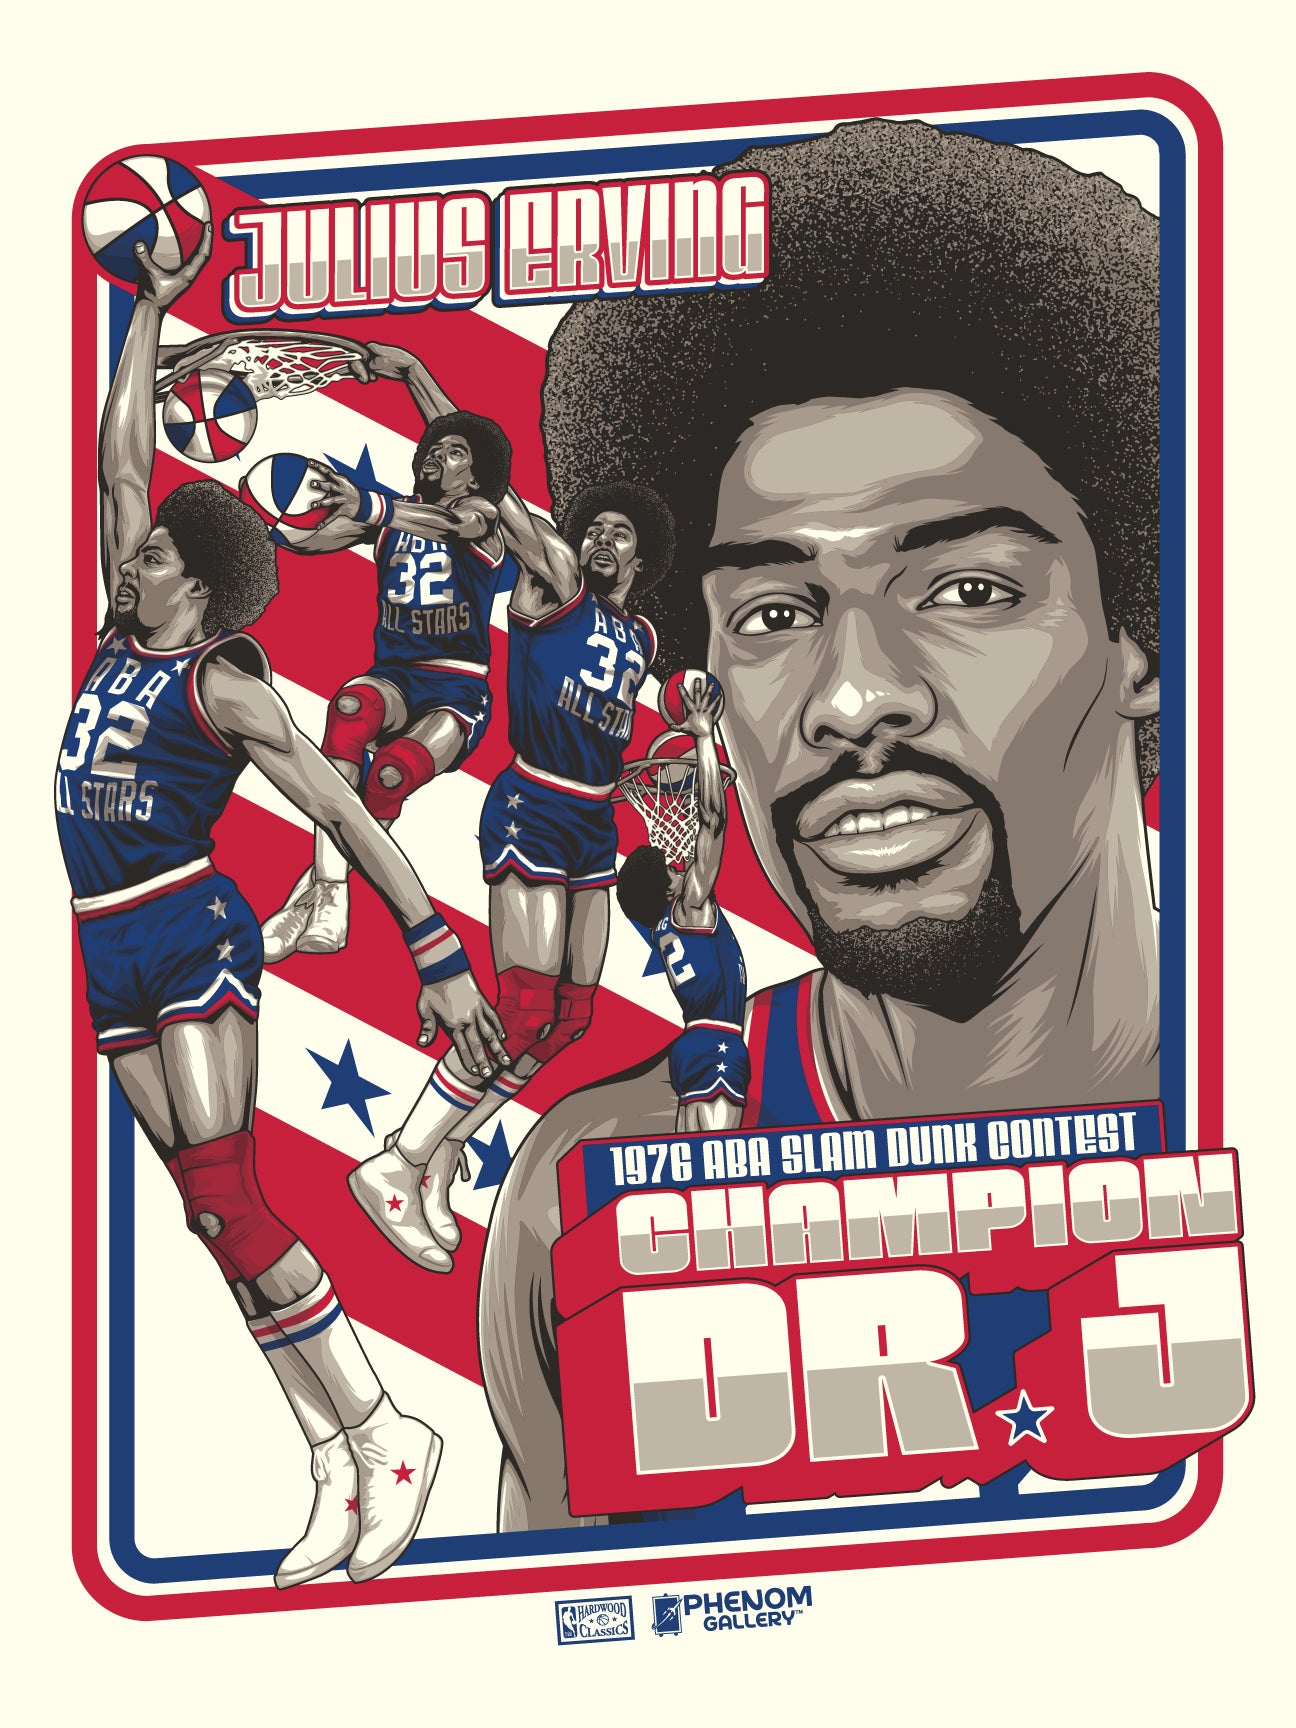 Dr. J MAKES A MAGICAL LAYUP!, Is Julius Dr. J Erving's iconic layup the  GREATEST SHOT ever?! 🏀, By Shot Science Basketball